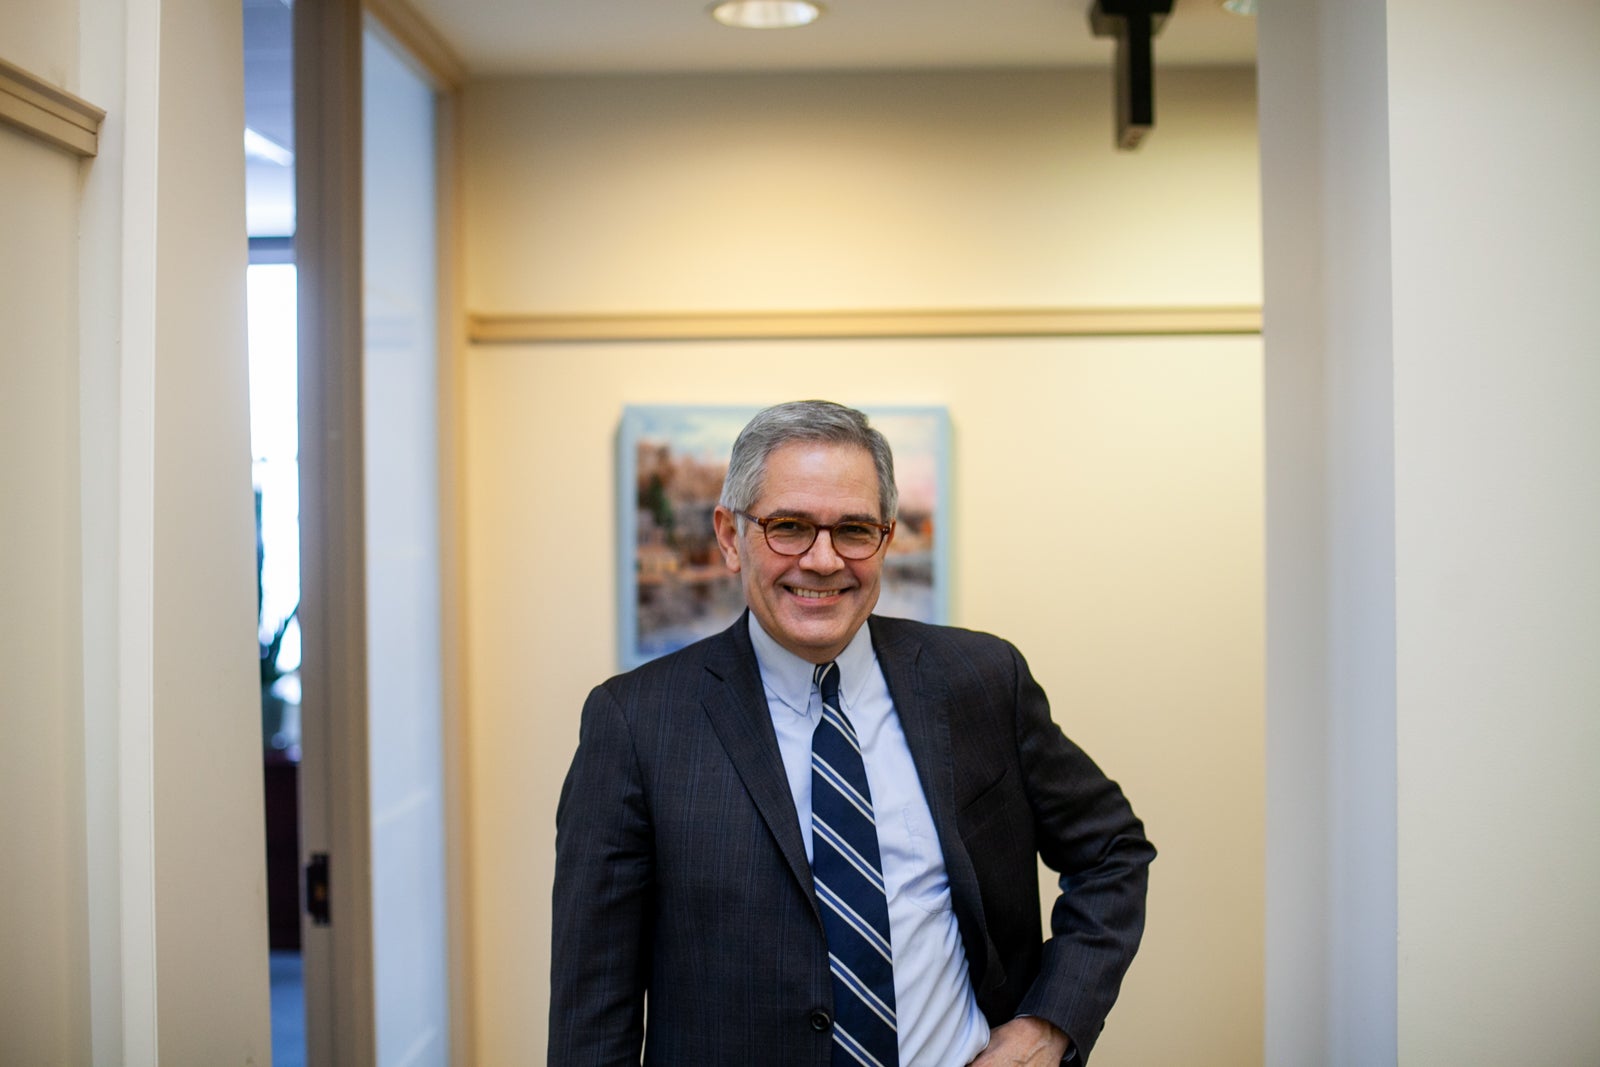 Why Krasner has become a model for other progressive DAs WHYY